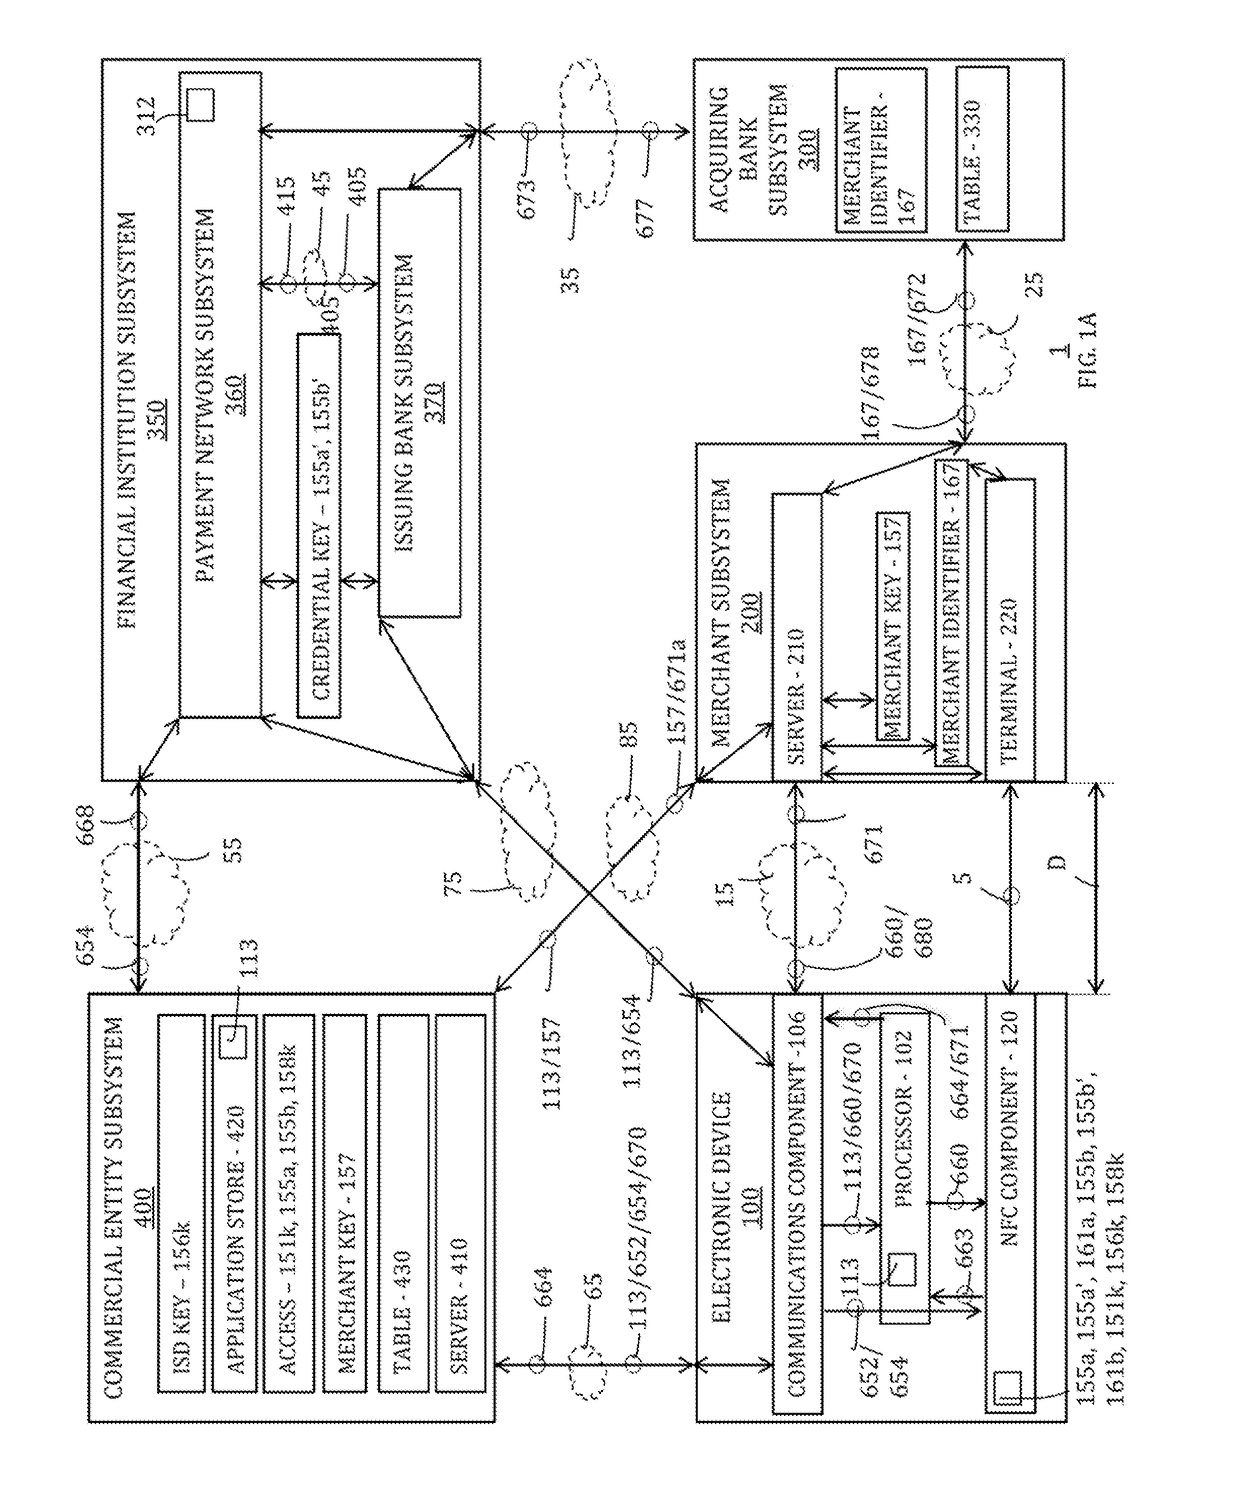 Multi-path communication of electronic device secure element data for online payments